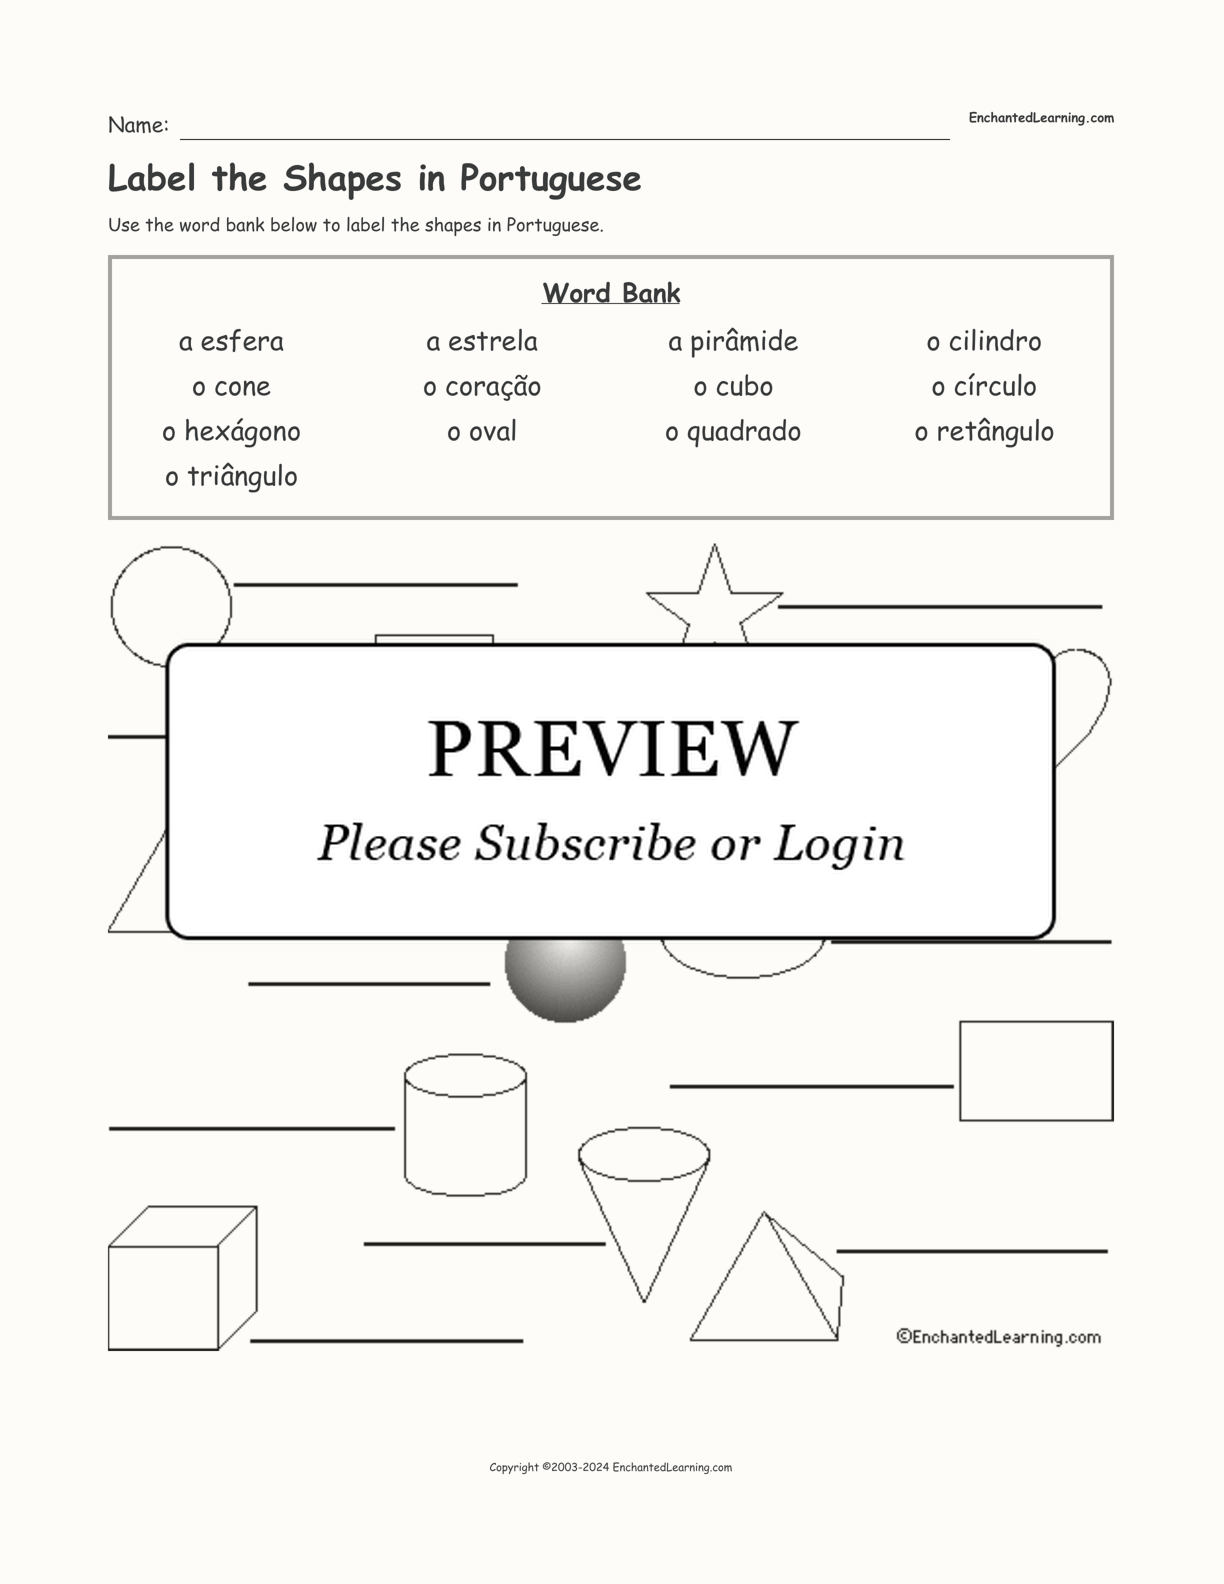 Label the Shapes in Portuguese interactive worksheet page 1